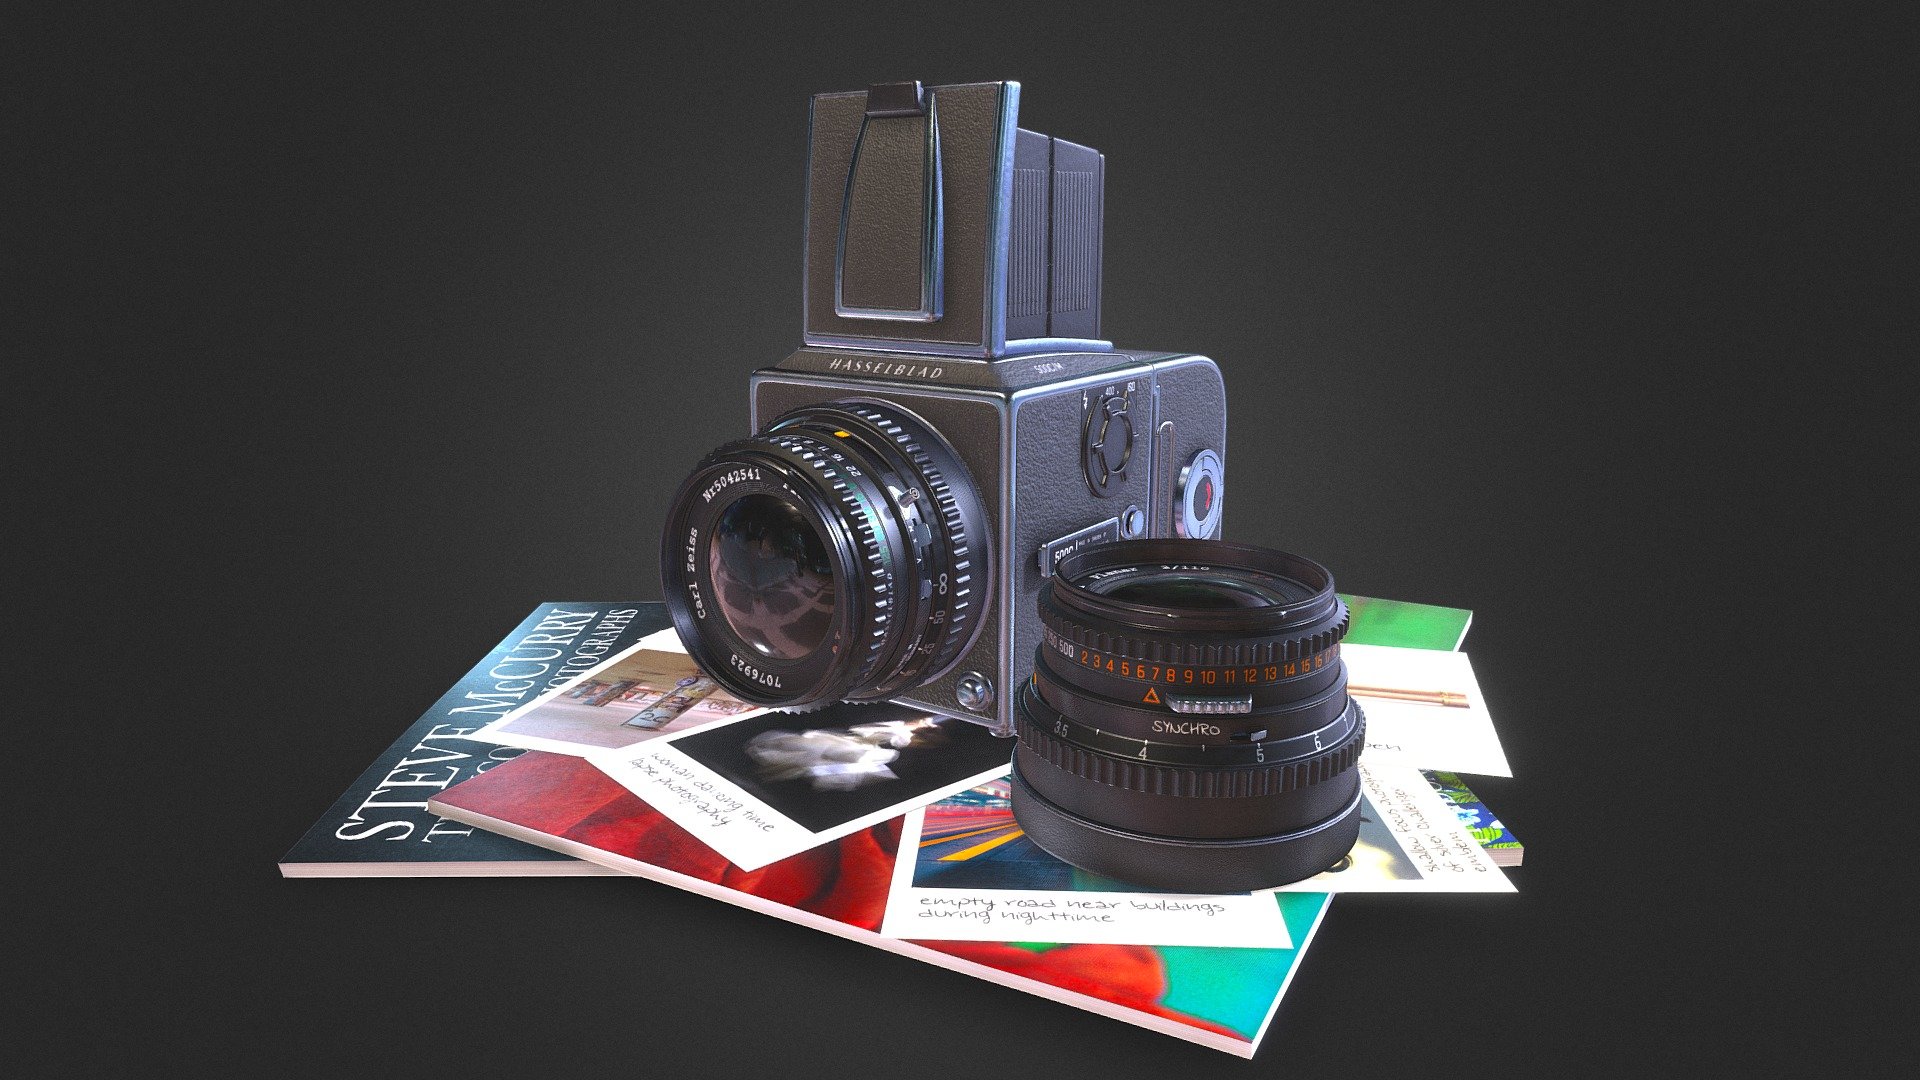 Hasselblad 500C the first camera on the Moon 3d model with PBR 4k textures by 13Particles.

For more artworks and updates follow us on:-

Instagram:- https://www.instagram.com/13particles/

Artstation:- https://thirteenparticles.artstation.com

Twitter:- https://twitter.com/13Particles

Facebook:- https://www.facebook.com/13Particles/

Linkedin:- https://www.linkedin.com/company/13particles - Hasselblad 500C the first camera on the Moon - 3D model by 13 Particles (@13particles) 3d model